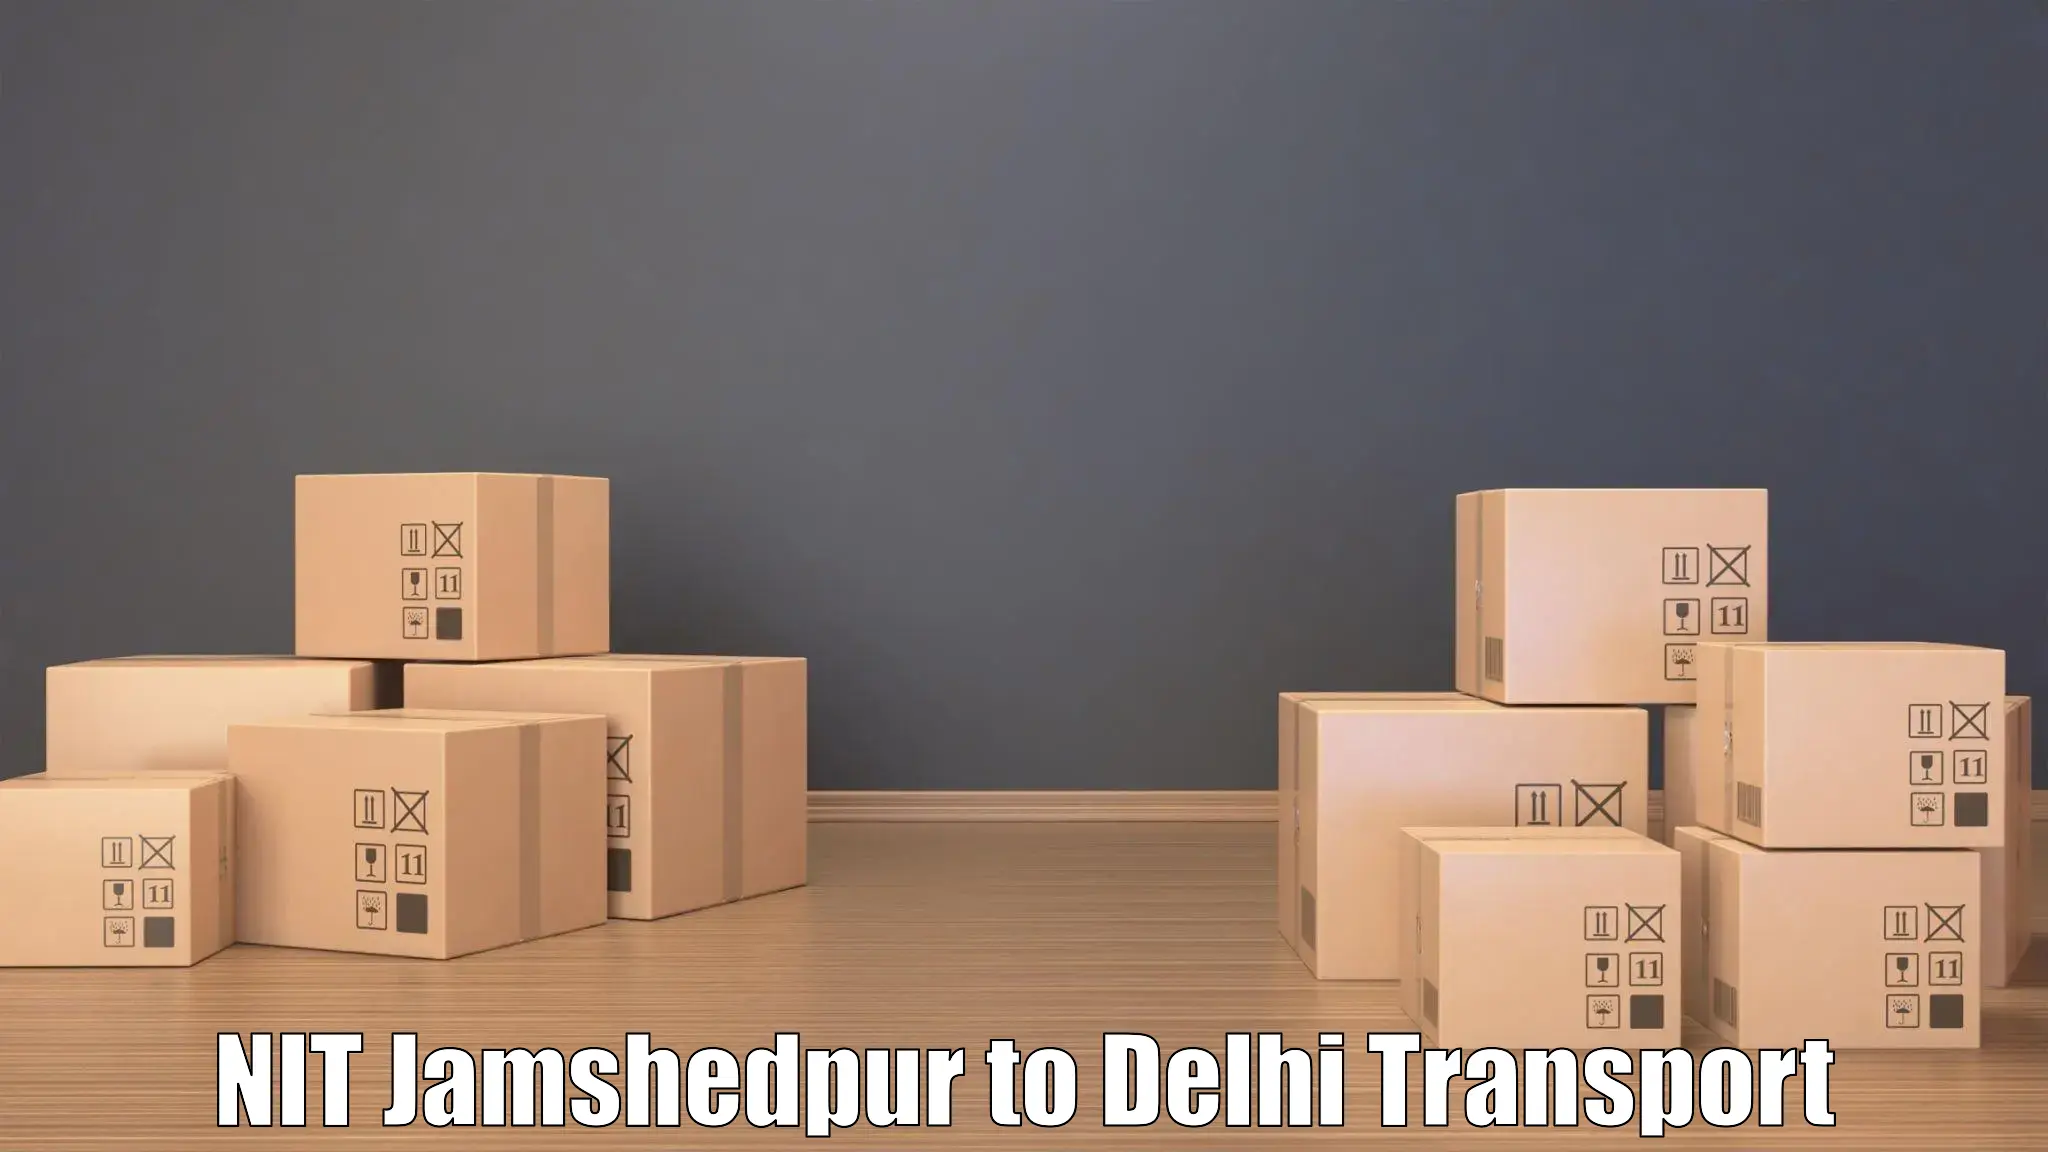 Vehicle courier services NIT Jamshedpur to IIT Delhi